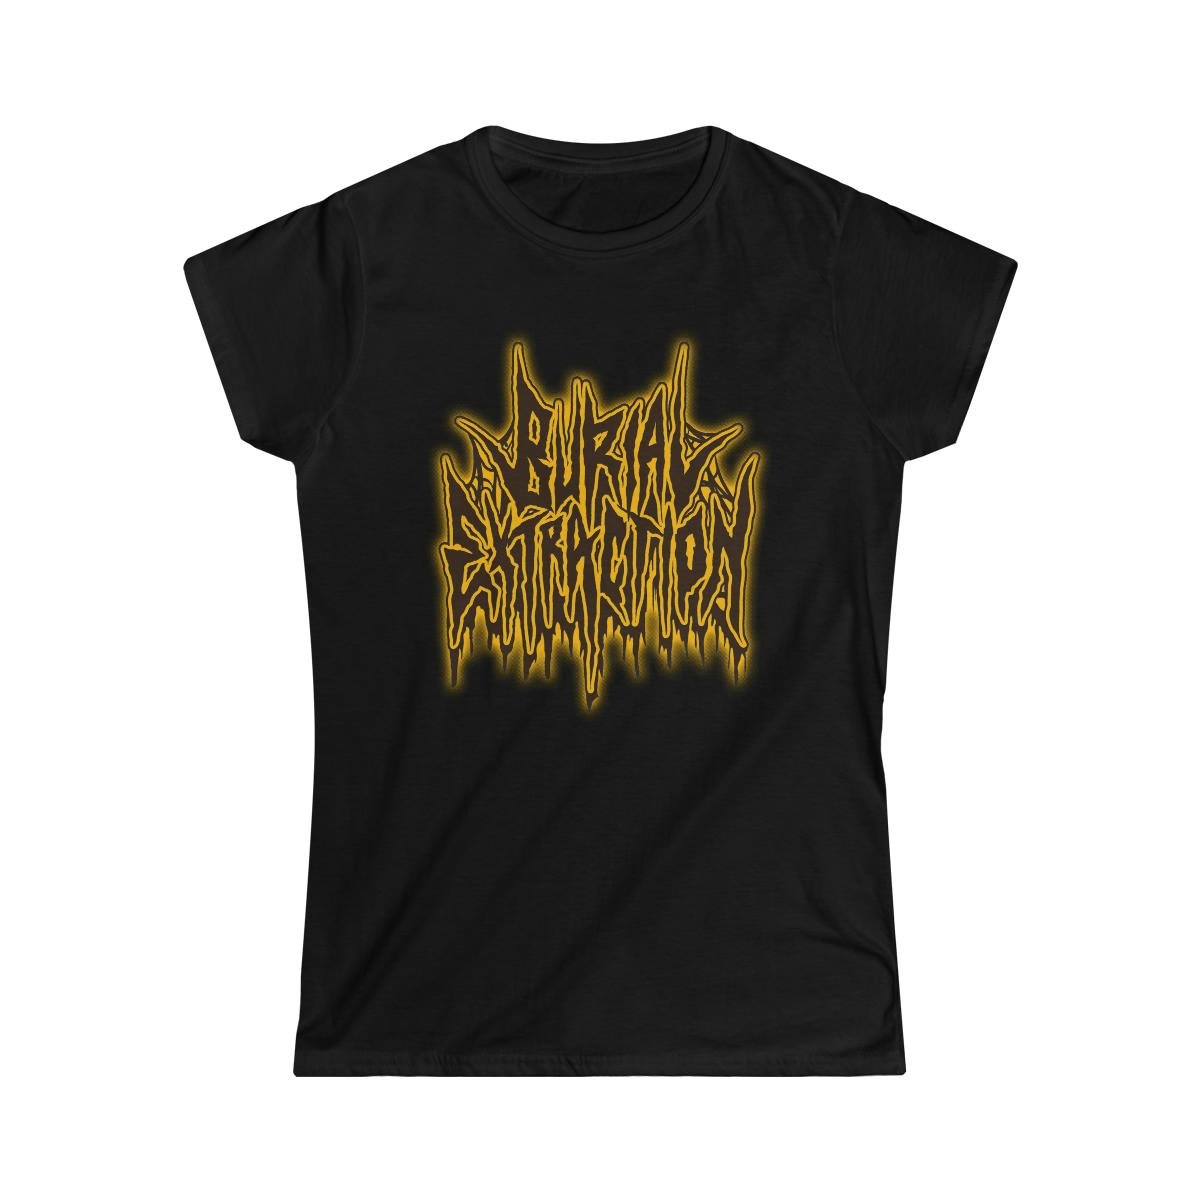 Burial Extraction – A Shadow Of Things To Come Logo Women’s Short Sleeve Tshirt